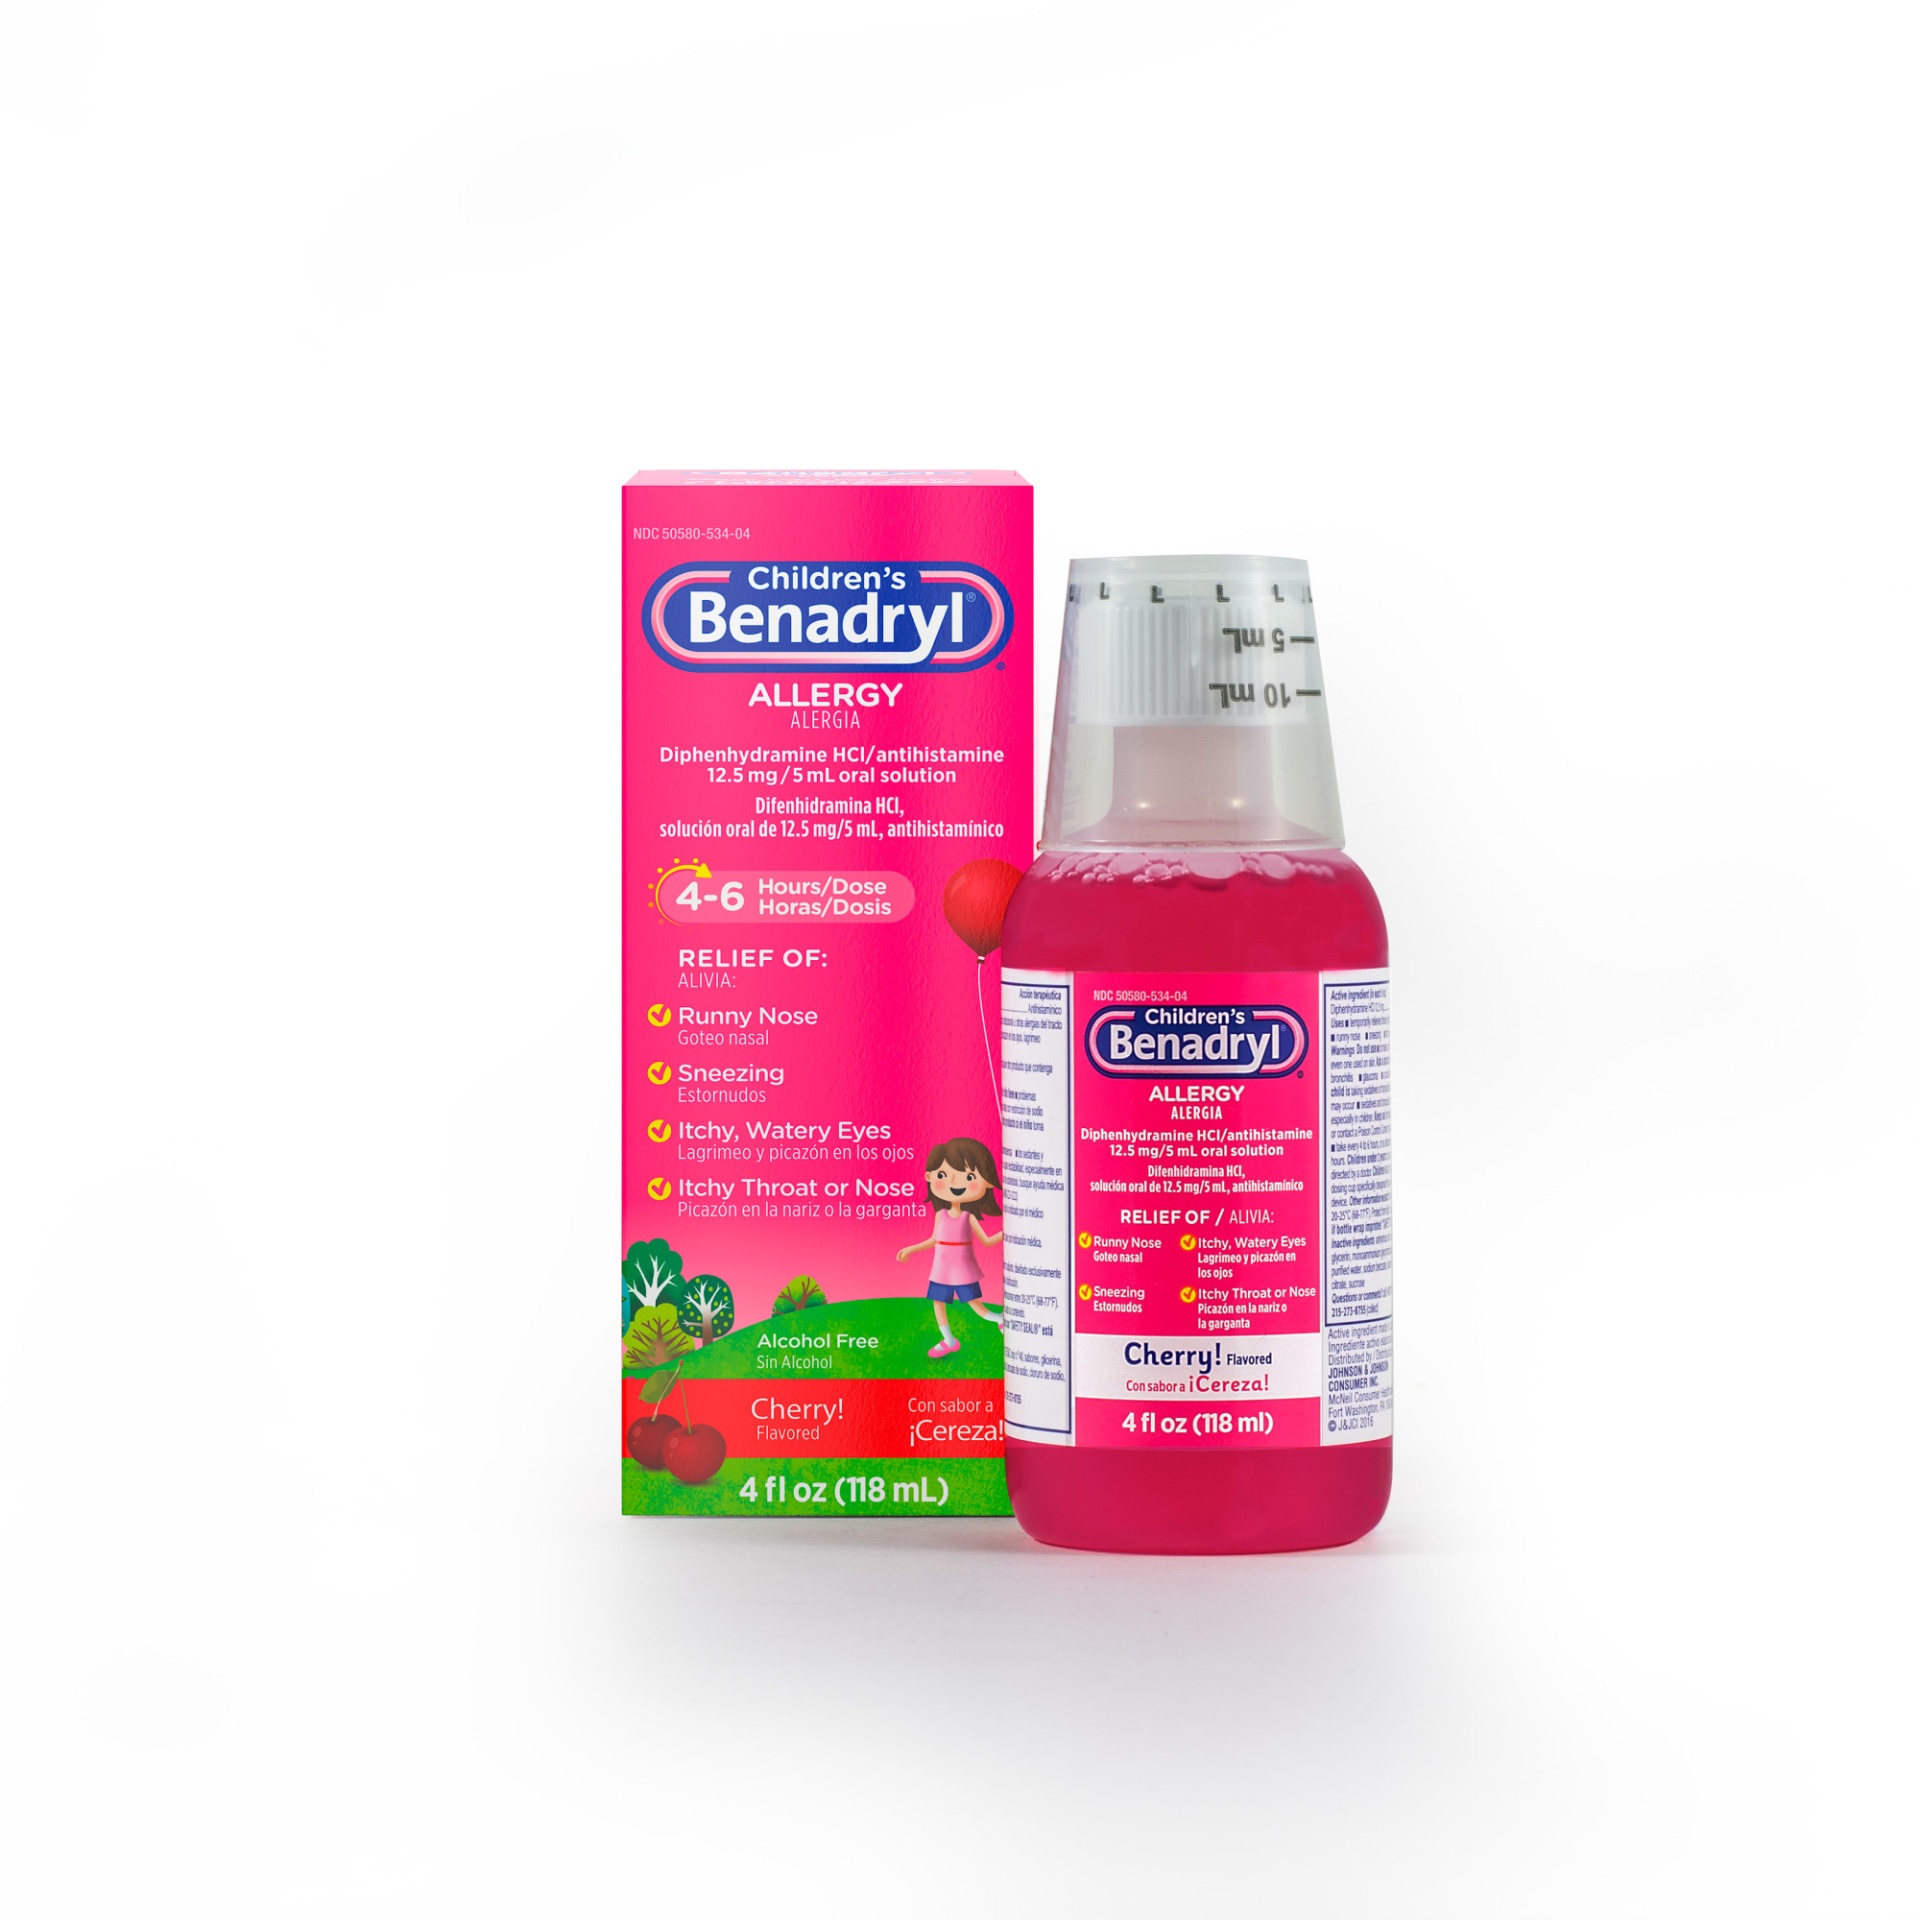 slide 1 of 5, Benadryl Allergy Relief Liquid Medicine with Diphenhydramine HCl, Kids' Allergy Syrup for Allergy Symptoms Like Runny Nose, Itchy Eyes & More, Cherry Flavor, 4 fl oz